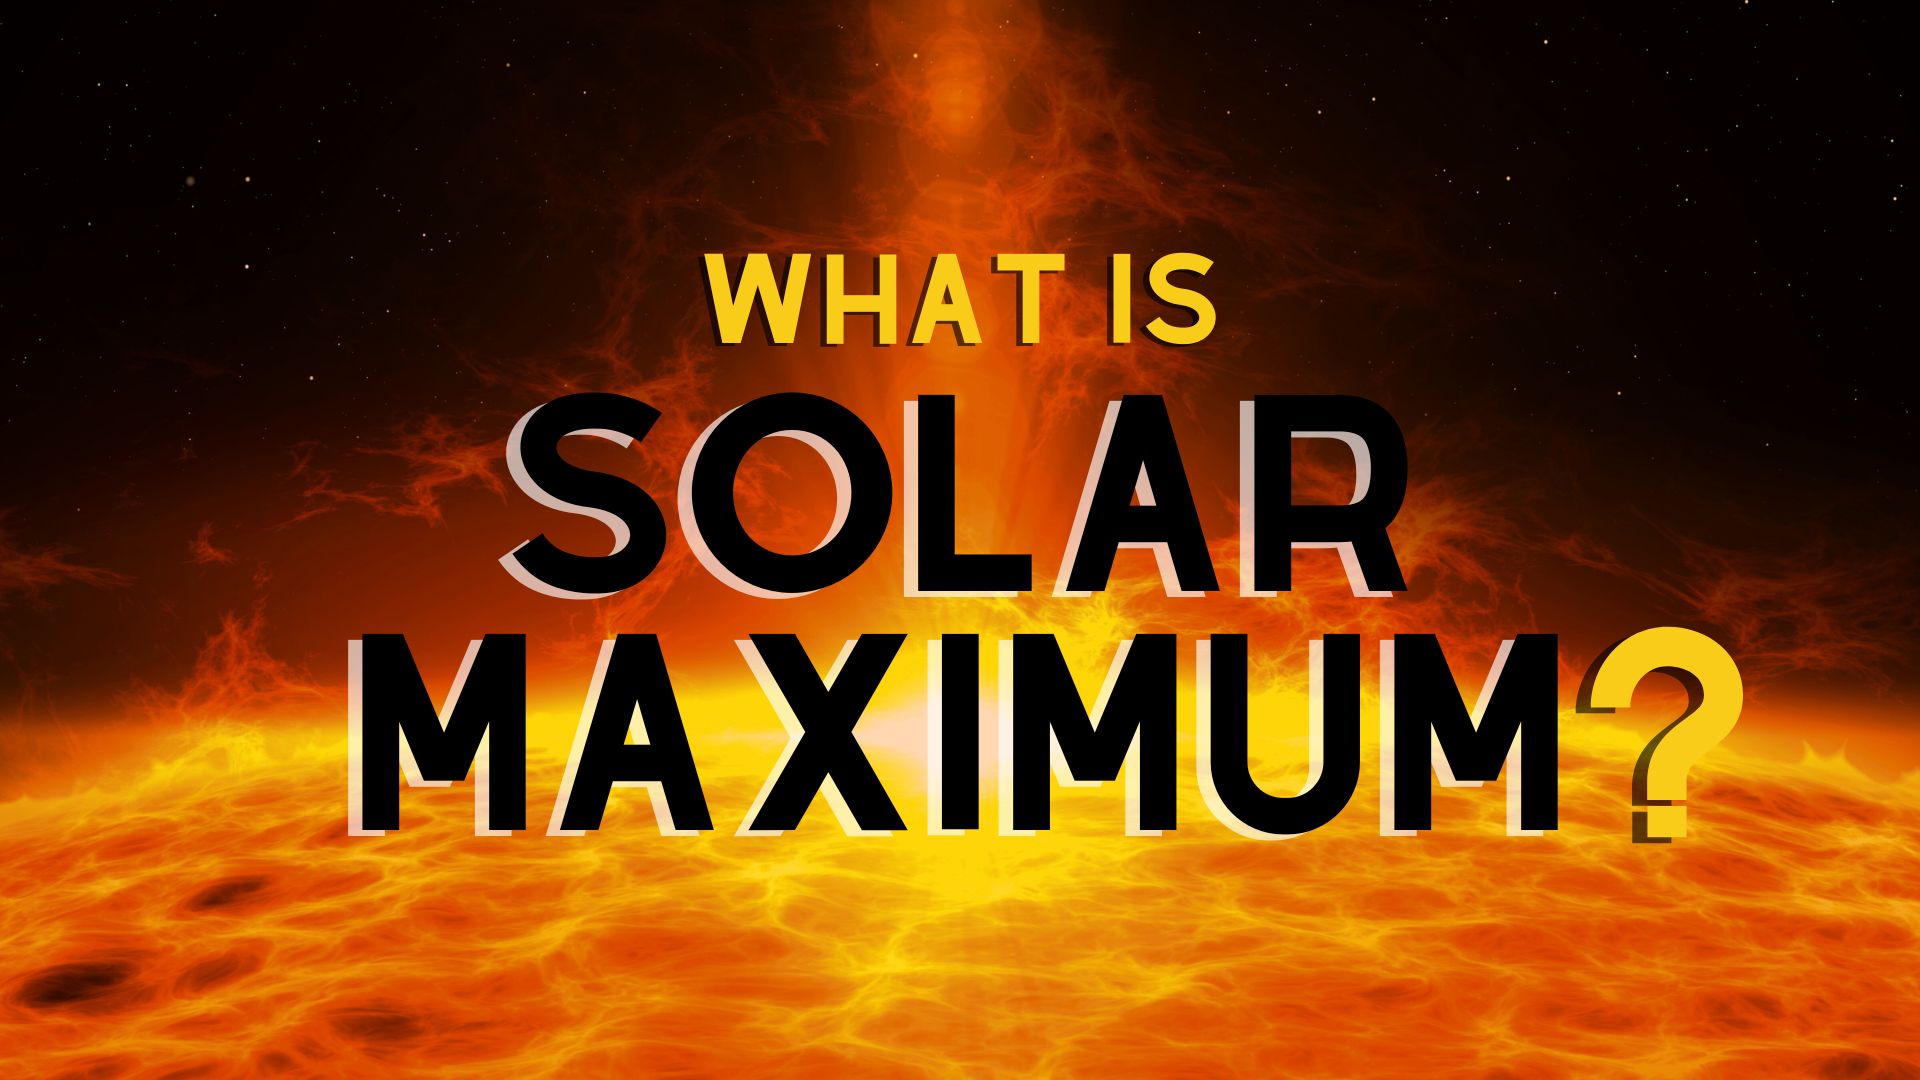 Solar maximum: What is it and when will it occur?